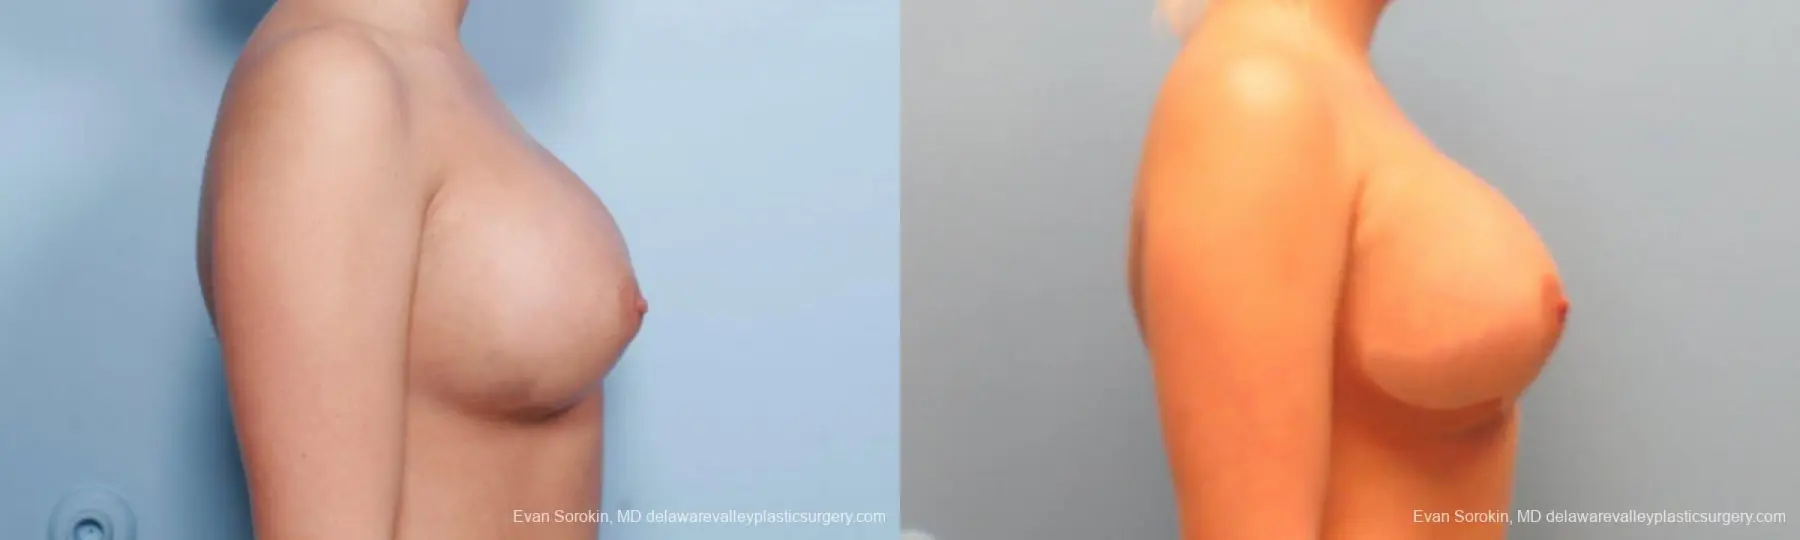 Philadelphia Breast Augmentation 9394 - Before and After 3